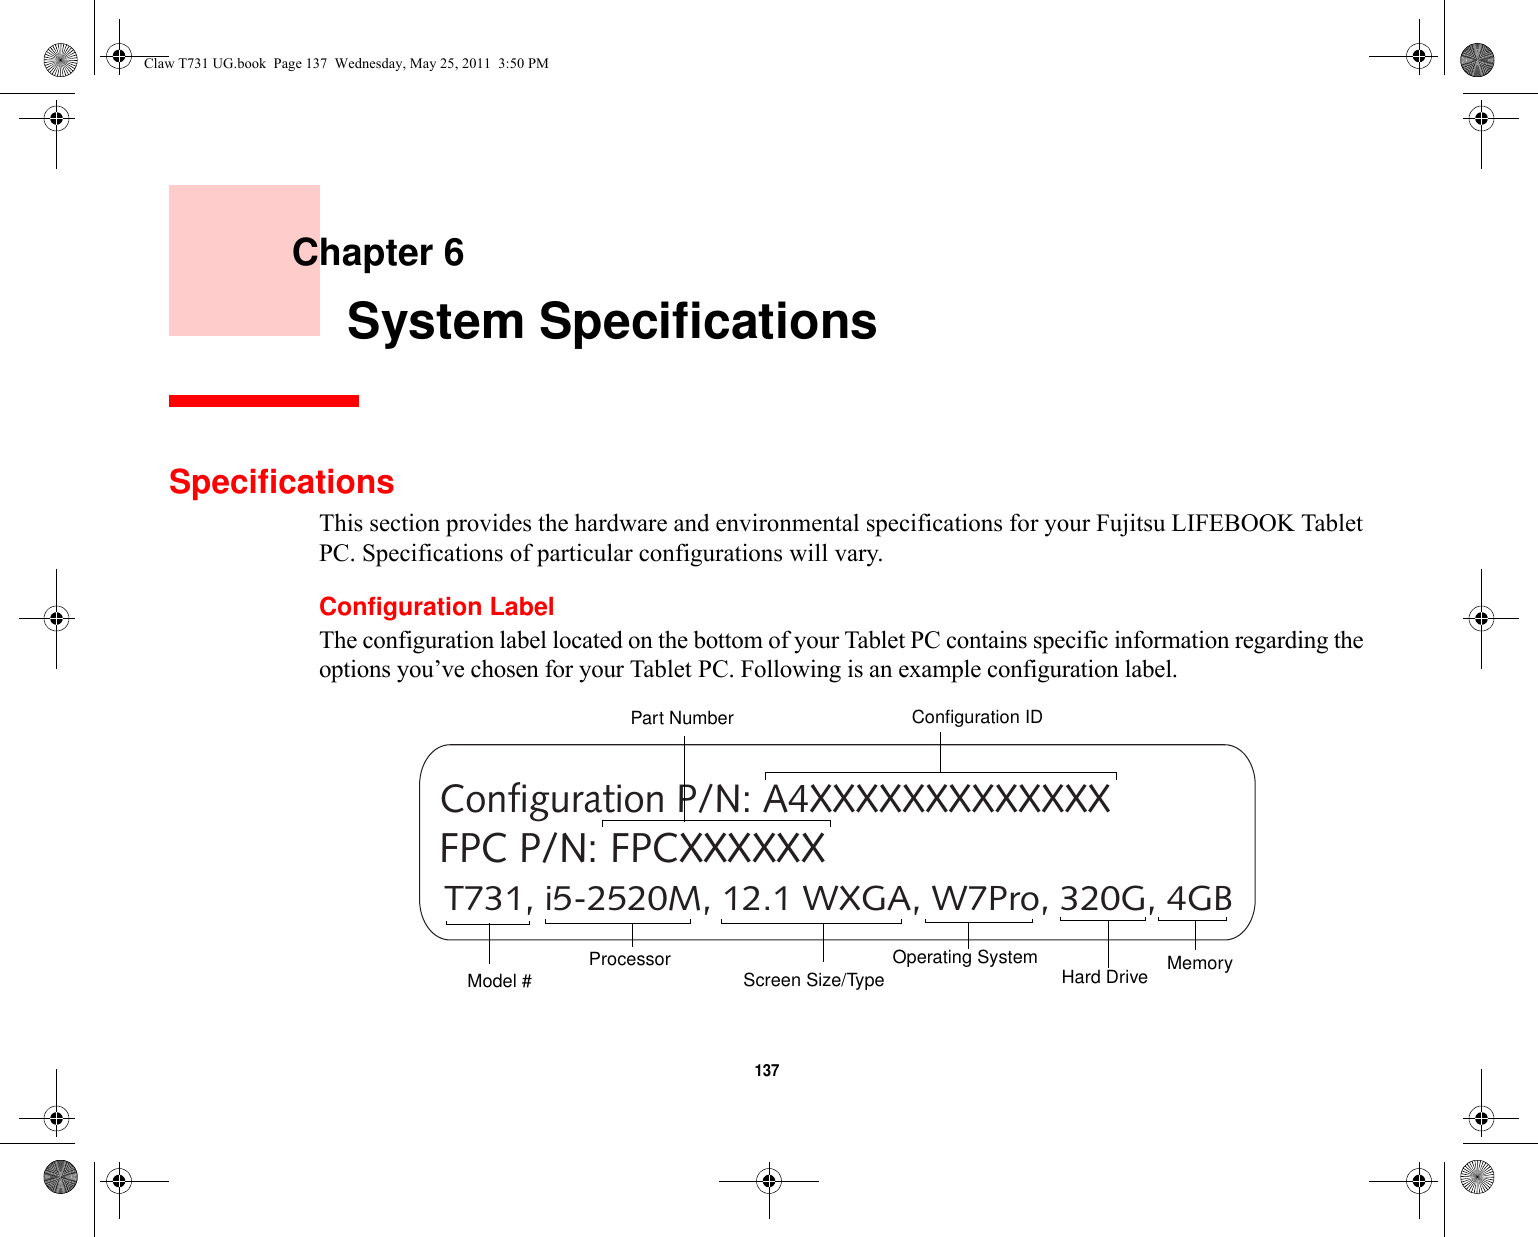 137     Chapter 6    System SpecificationsSpecificationsThis section provides the hardware and environmental specifications for your Fujitsu LIFEBOOK Tablet PC. Specifications of particular configurations will vary.Configuration LabelThe configuration label located on the bottom of your Tablet PC contains specific information regarding the options you’ve chosen for your Tablet PC. Following is an example configuration label.T731, i5-2520M, 12.1 WXGA, W7Pro, 320G, 4GBConfiguration P/N: A4XXXXXXXXXXXXXFPC P/N: FPCXXXXXXHard Drive Part NumberProcessorModel # MemoryOperating System Screen Size/TypeConfiguration IDClaw T731 UG.book  Page 137  Wednesday, May 25, 2011  3:50 PM